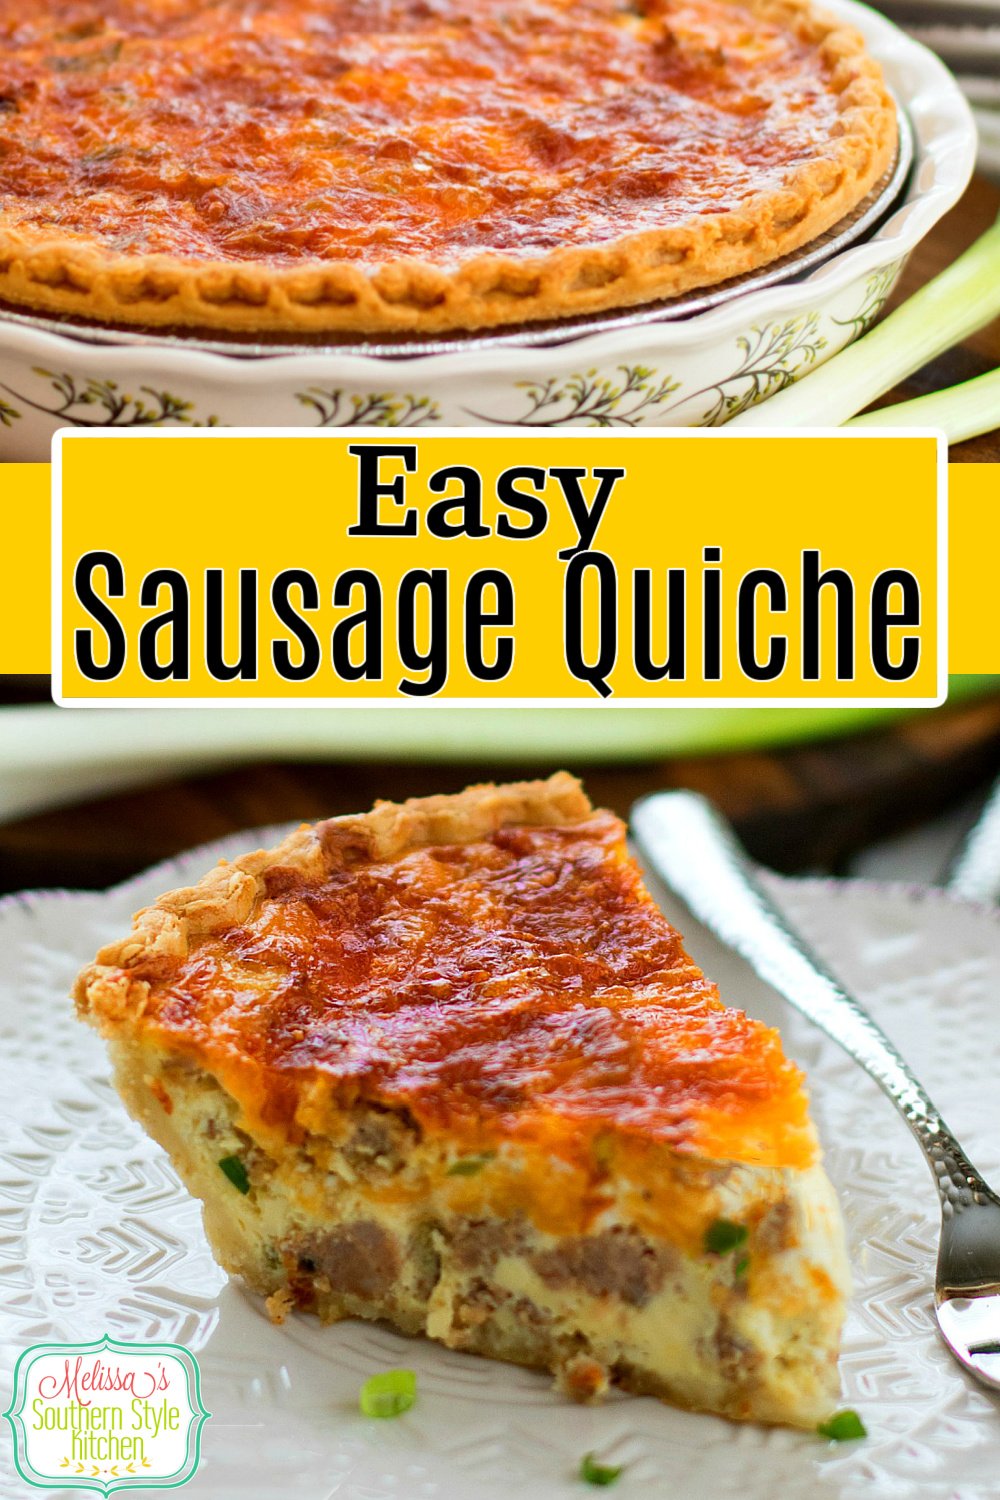 This Easy Sausage Quiche turns pantry staples into an any-time-of-day quiche feast #sausagequiche #quicherecipes #easysausagequiche #bestquicherecipes #brunch #breakfast #holidaybrunch #christmasbrunch #easyrecipes #dinner #southernfood #eggs #sausage #porkrecipes #southernrecipes via @melissasssk